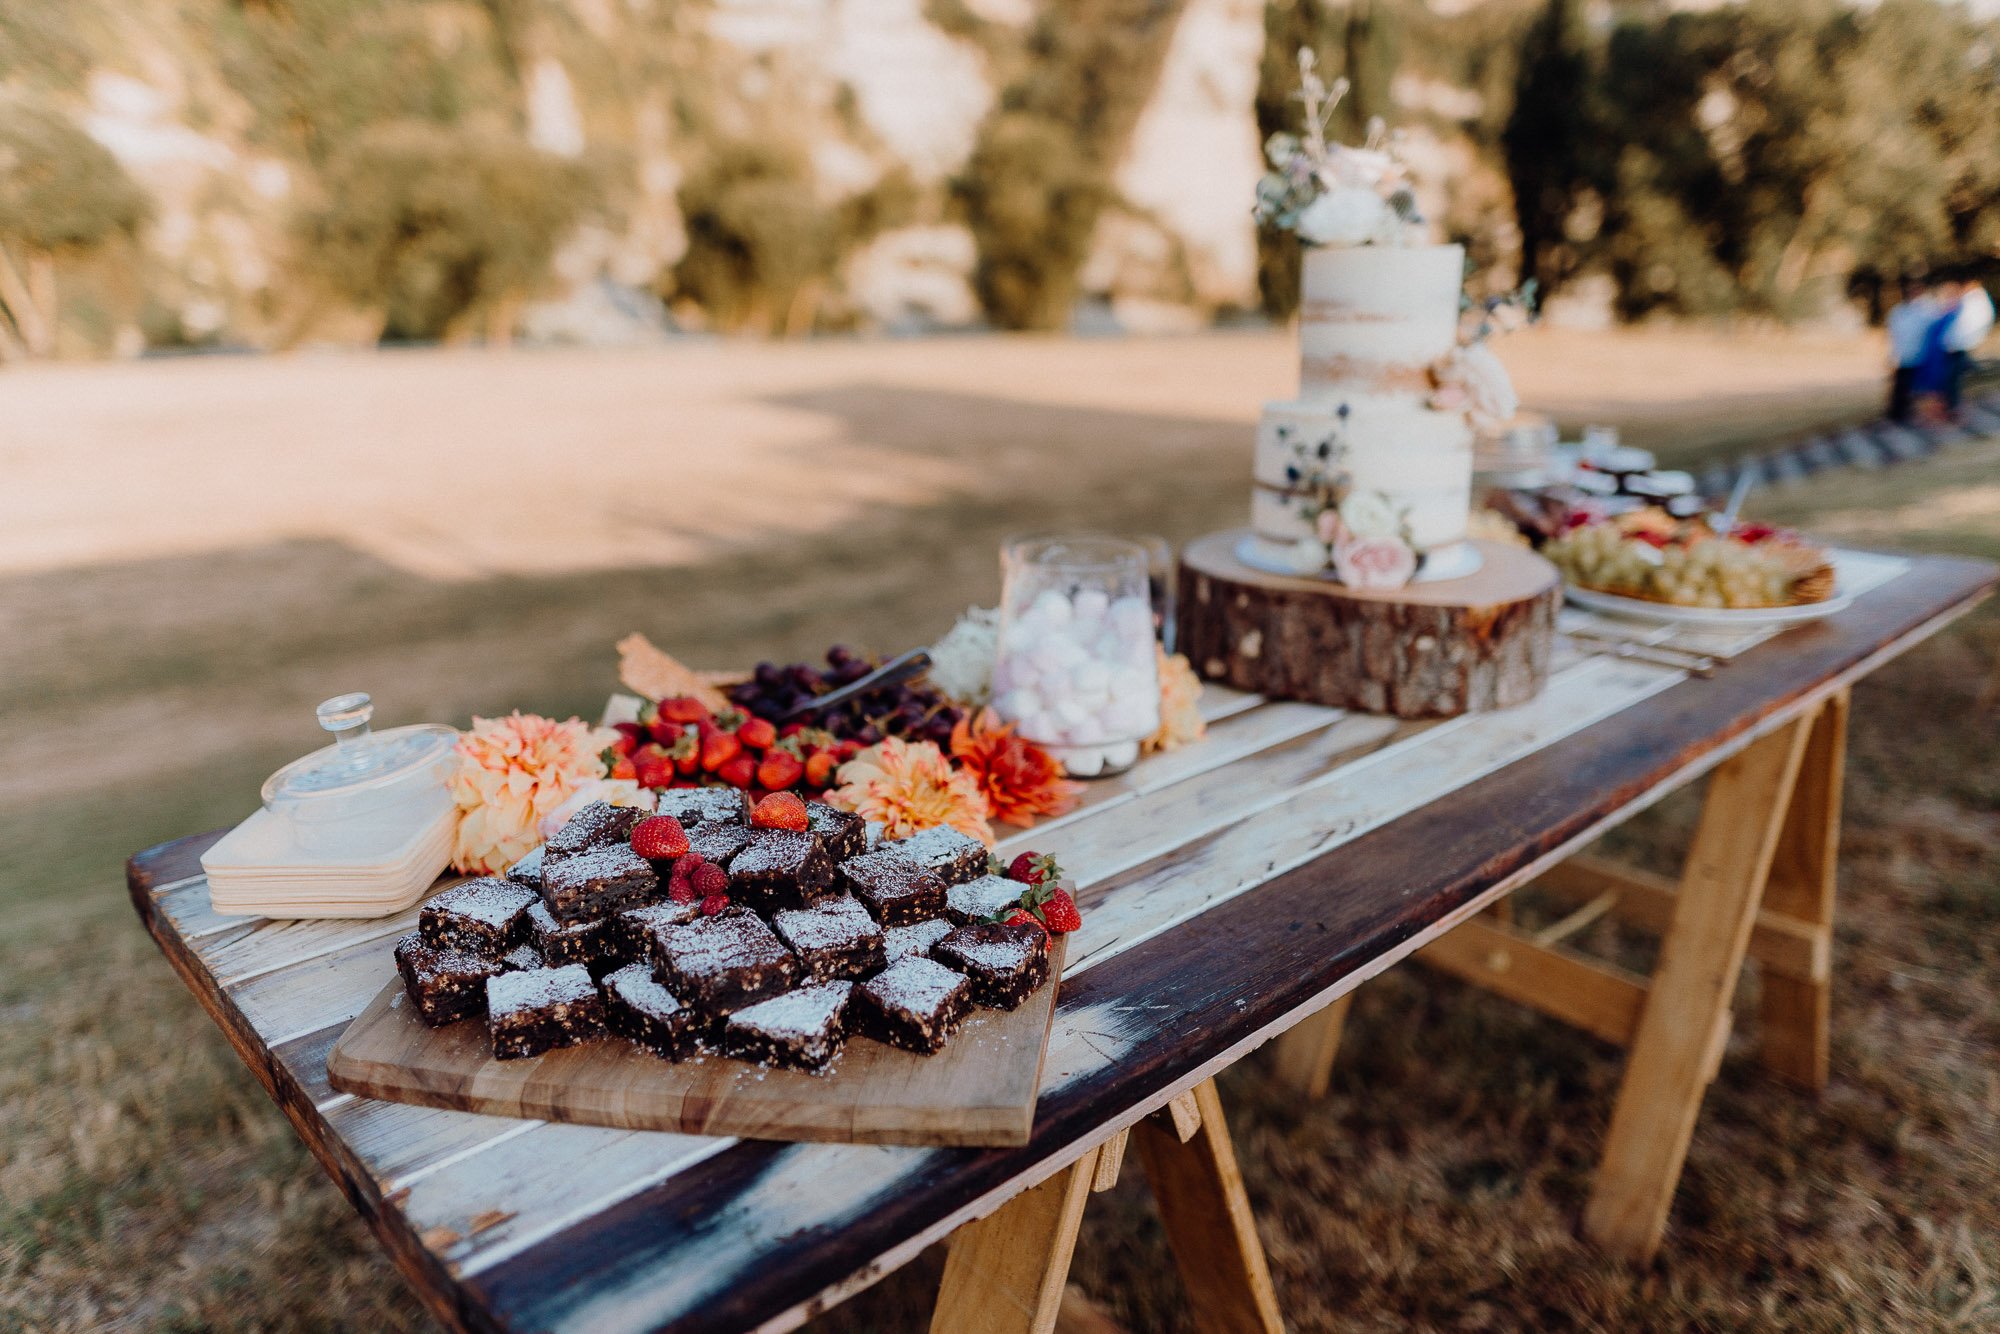 Wedding Photography Of Grazing Table Ideas 038. A desert theme grazing table to go with the wedding cake.